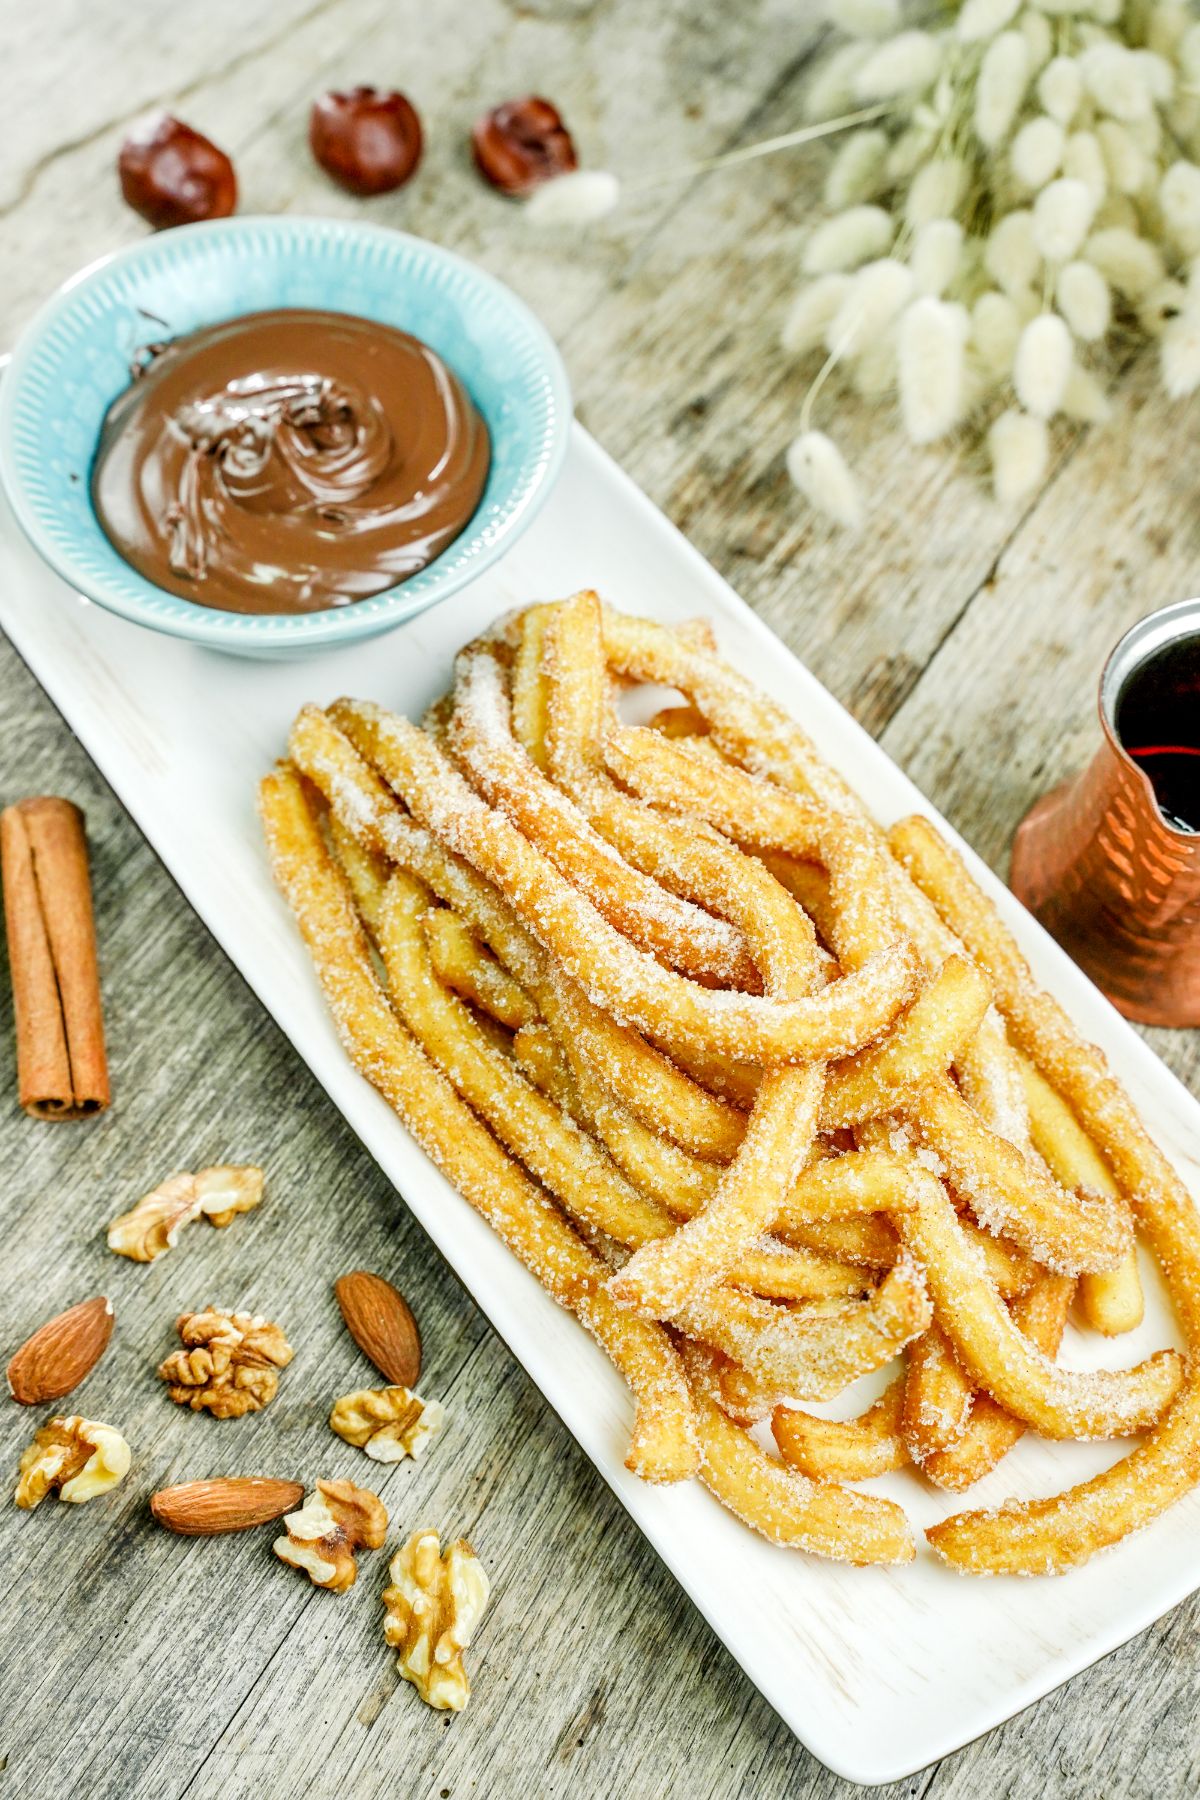 white rectangle plate holding churros and teal bowl of caramel sauce